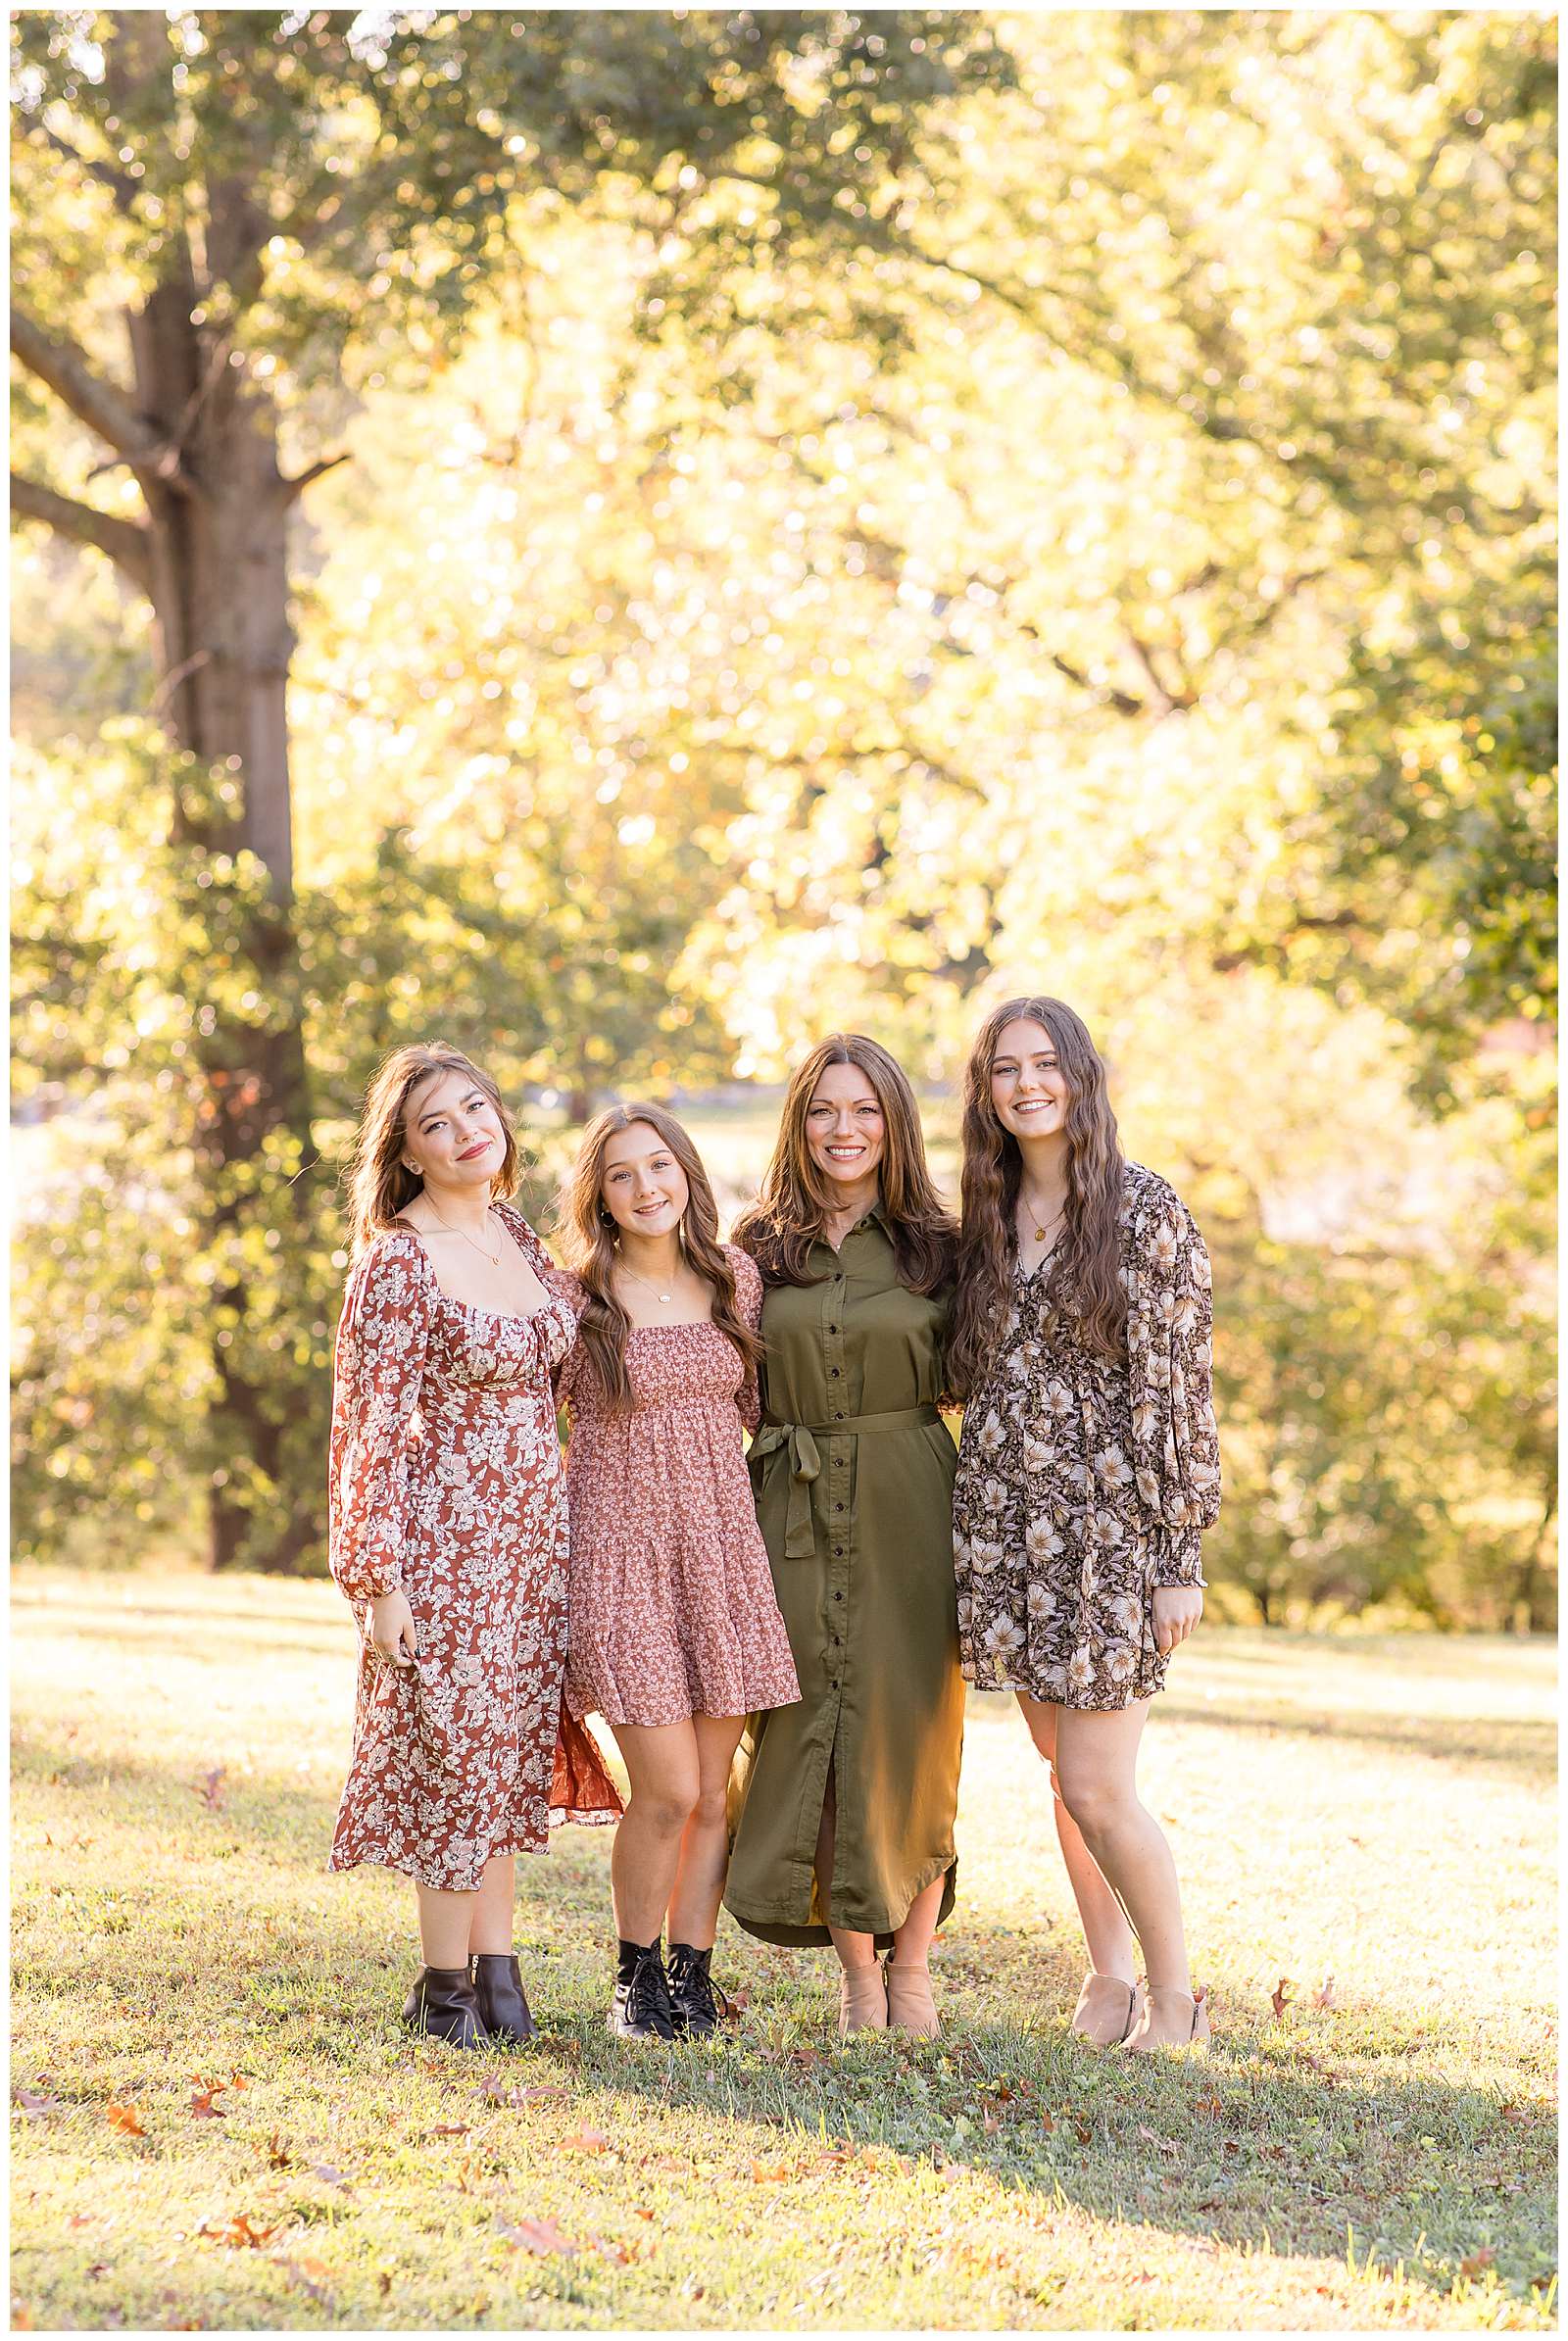 A mom wearing an olive, button-down dress stands with her daughter and her sons girlfriends during their fall, family photography session.  The girls wear long sleeve dresses and booties in fall floral prints.